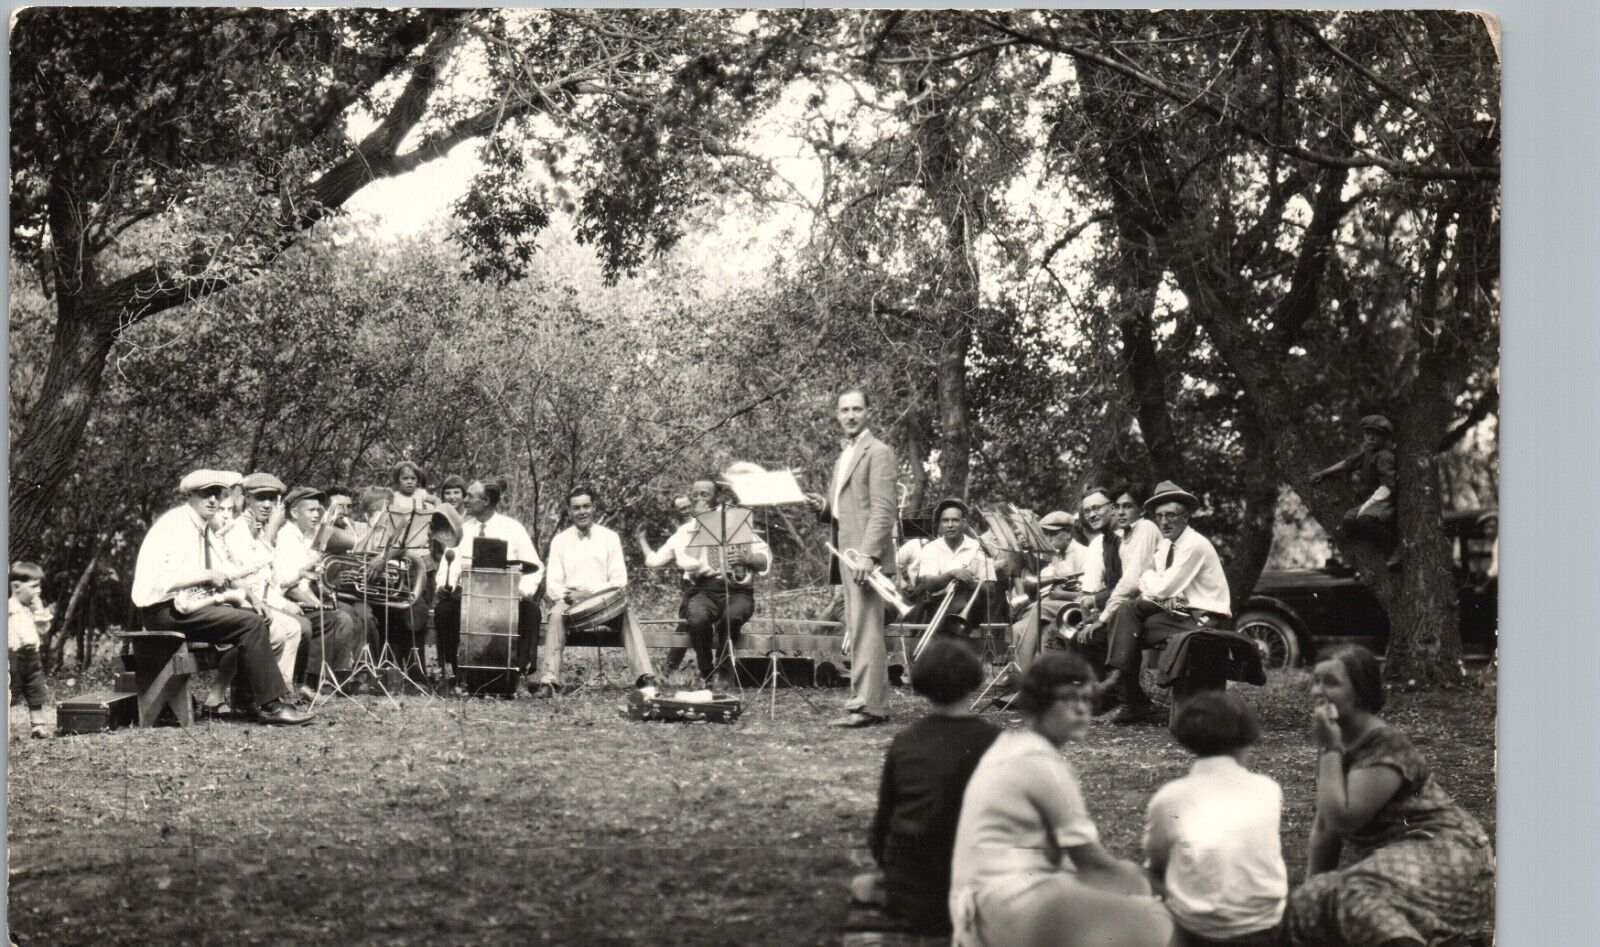 OUTDOOR BAND CONCERT real photo postcard rppc drums music horns summer fun